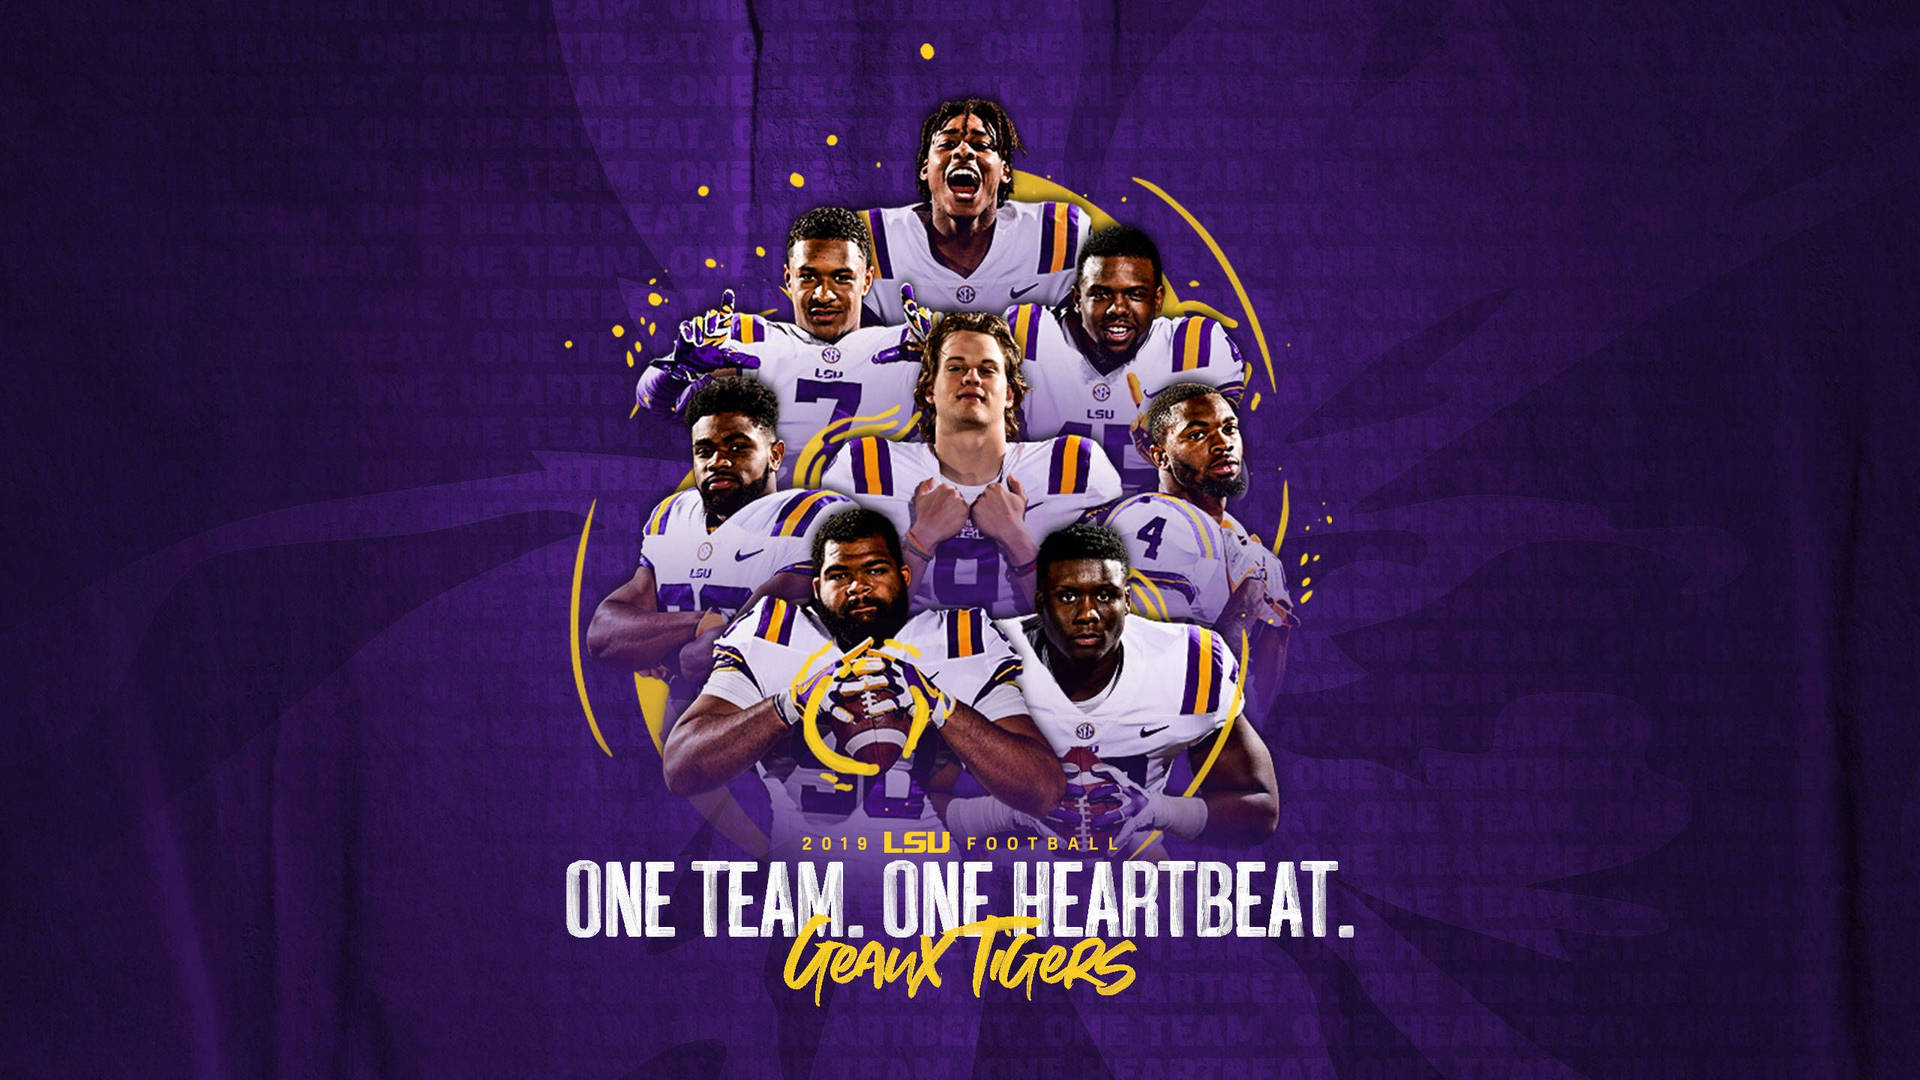 Lsu Tigers One Team One Heartbeat T-shirt Background